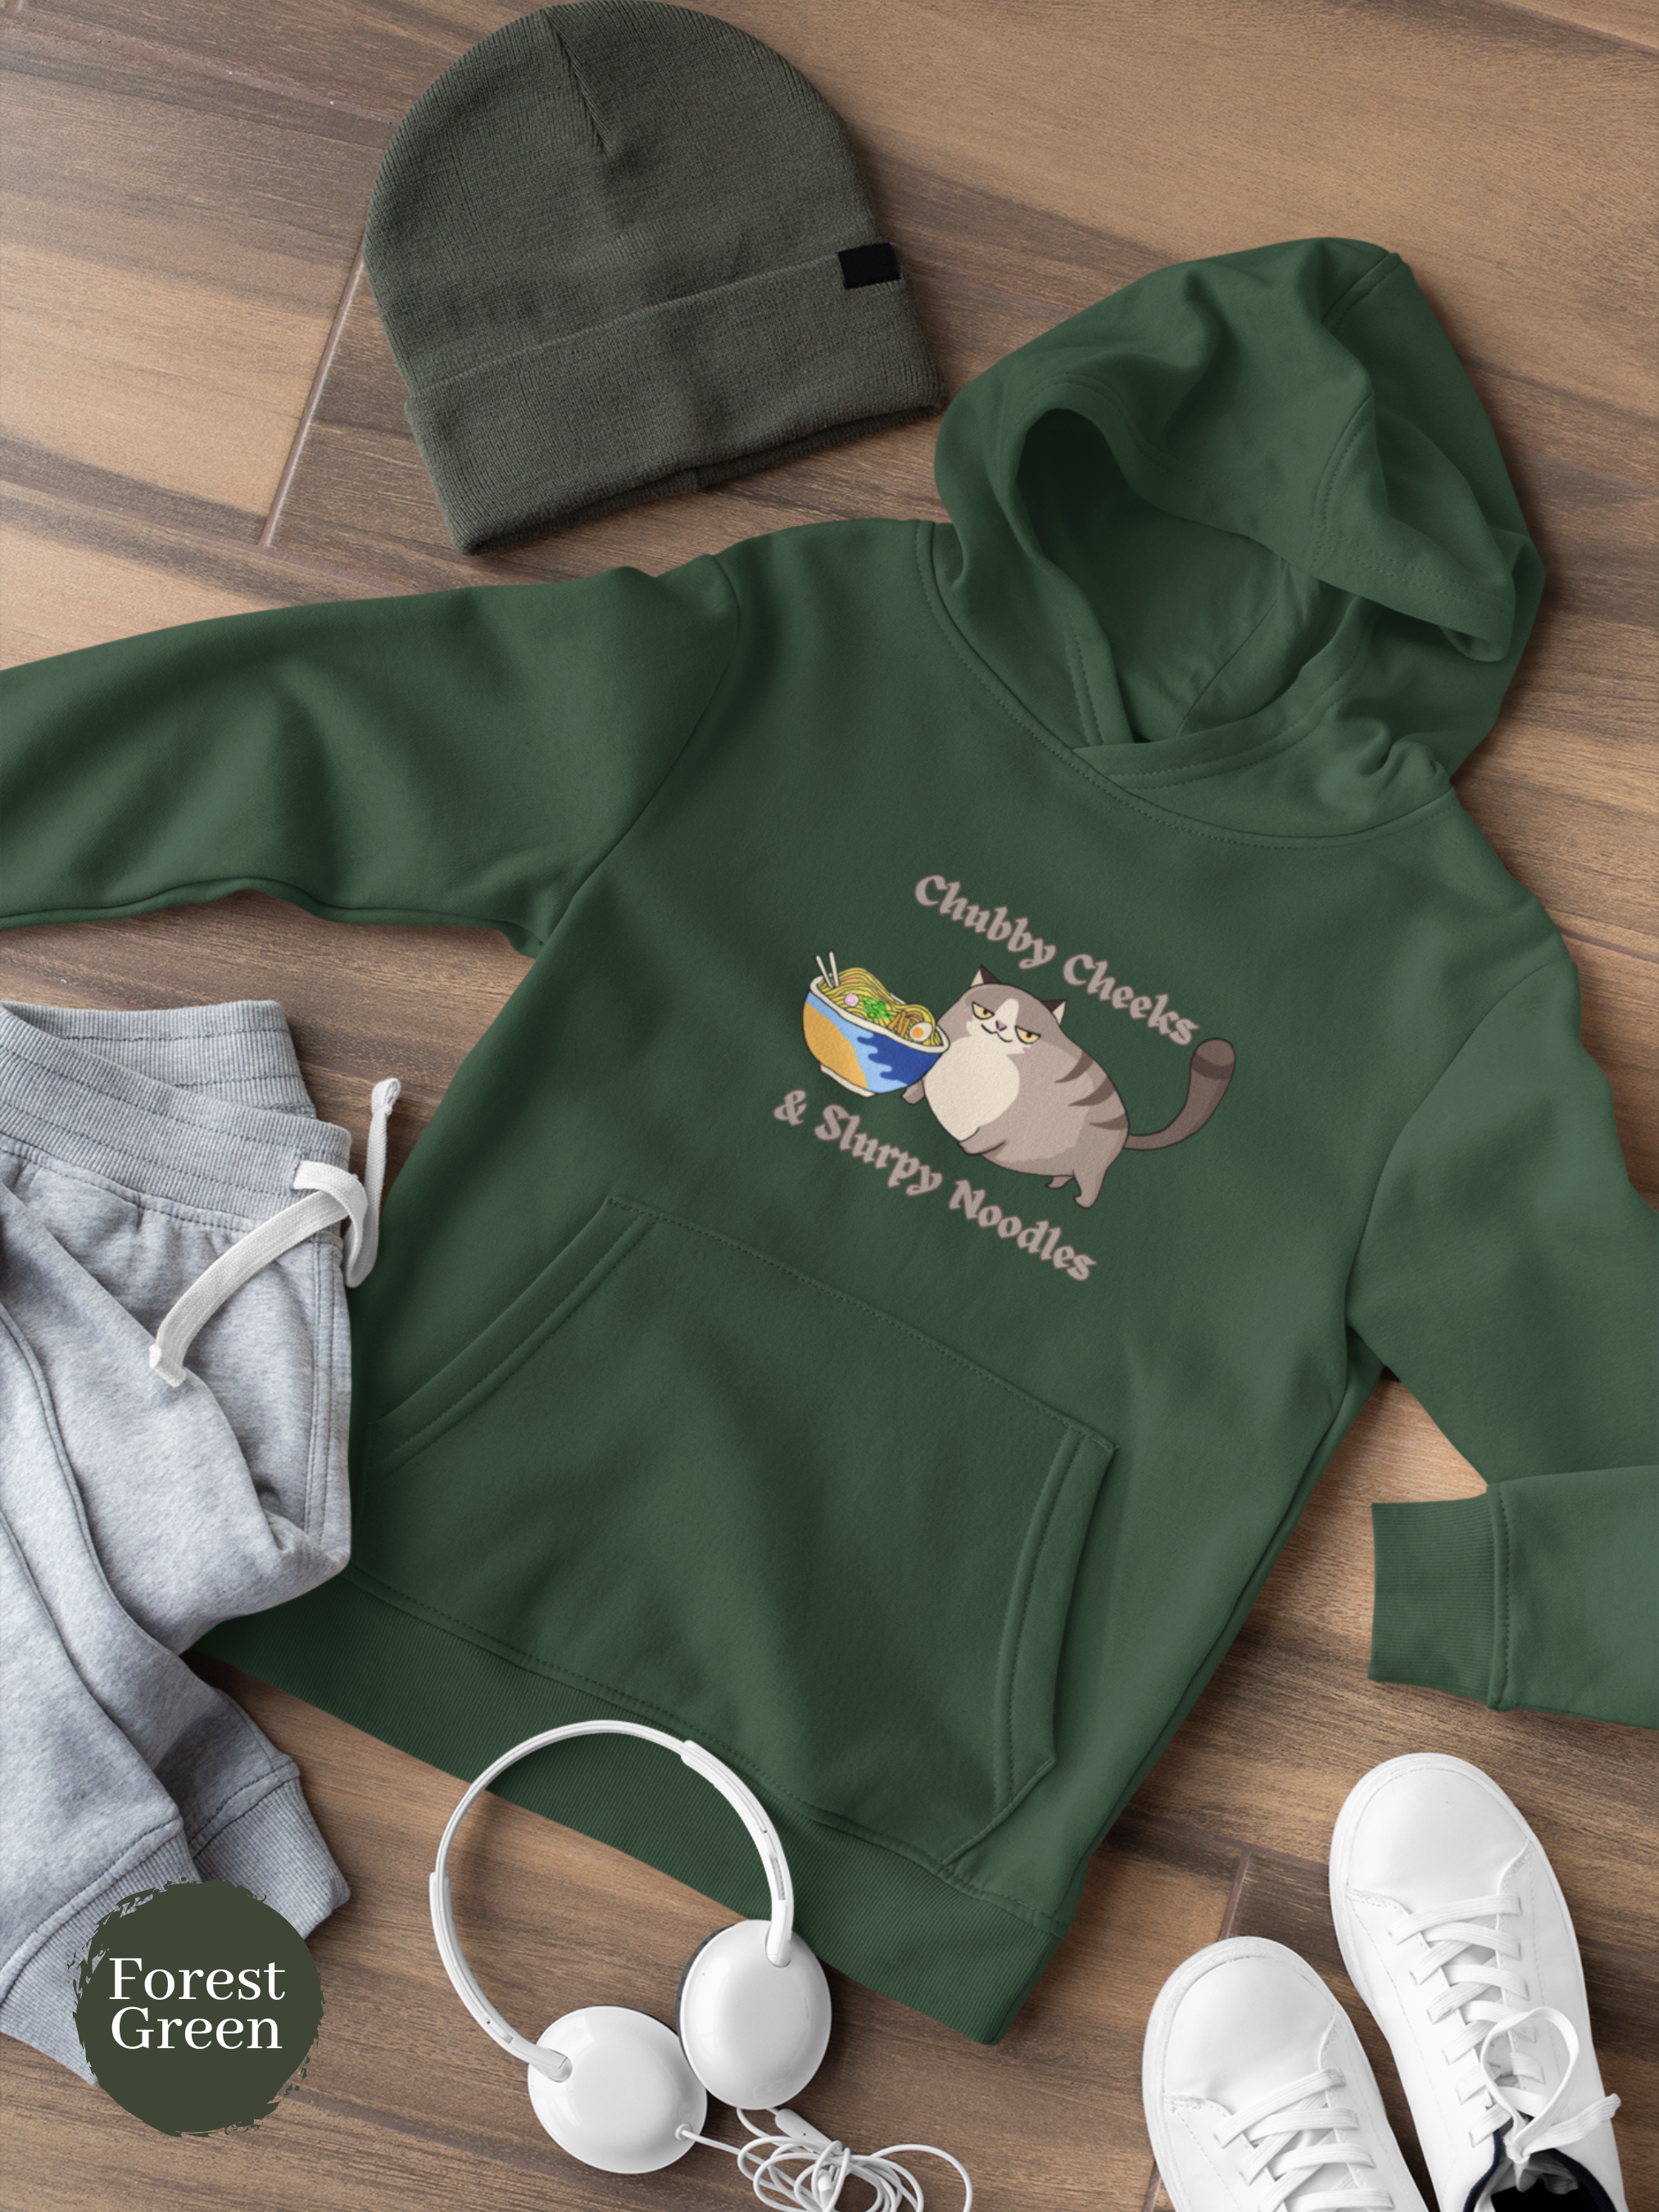 Ramen Hoodie: Chubby Cheeks & Slurpy Noodles - A Deliciously Adorable Combination of Foodie and Pun Hoodies